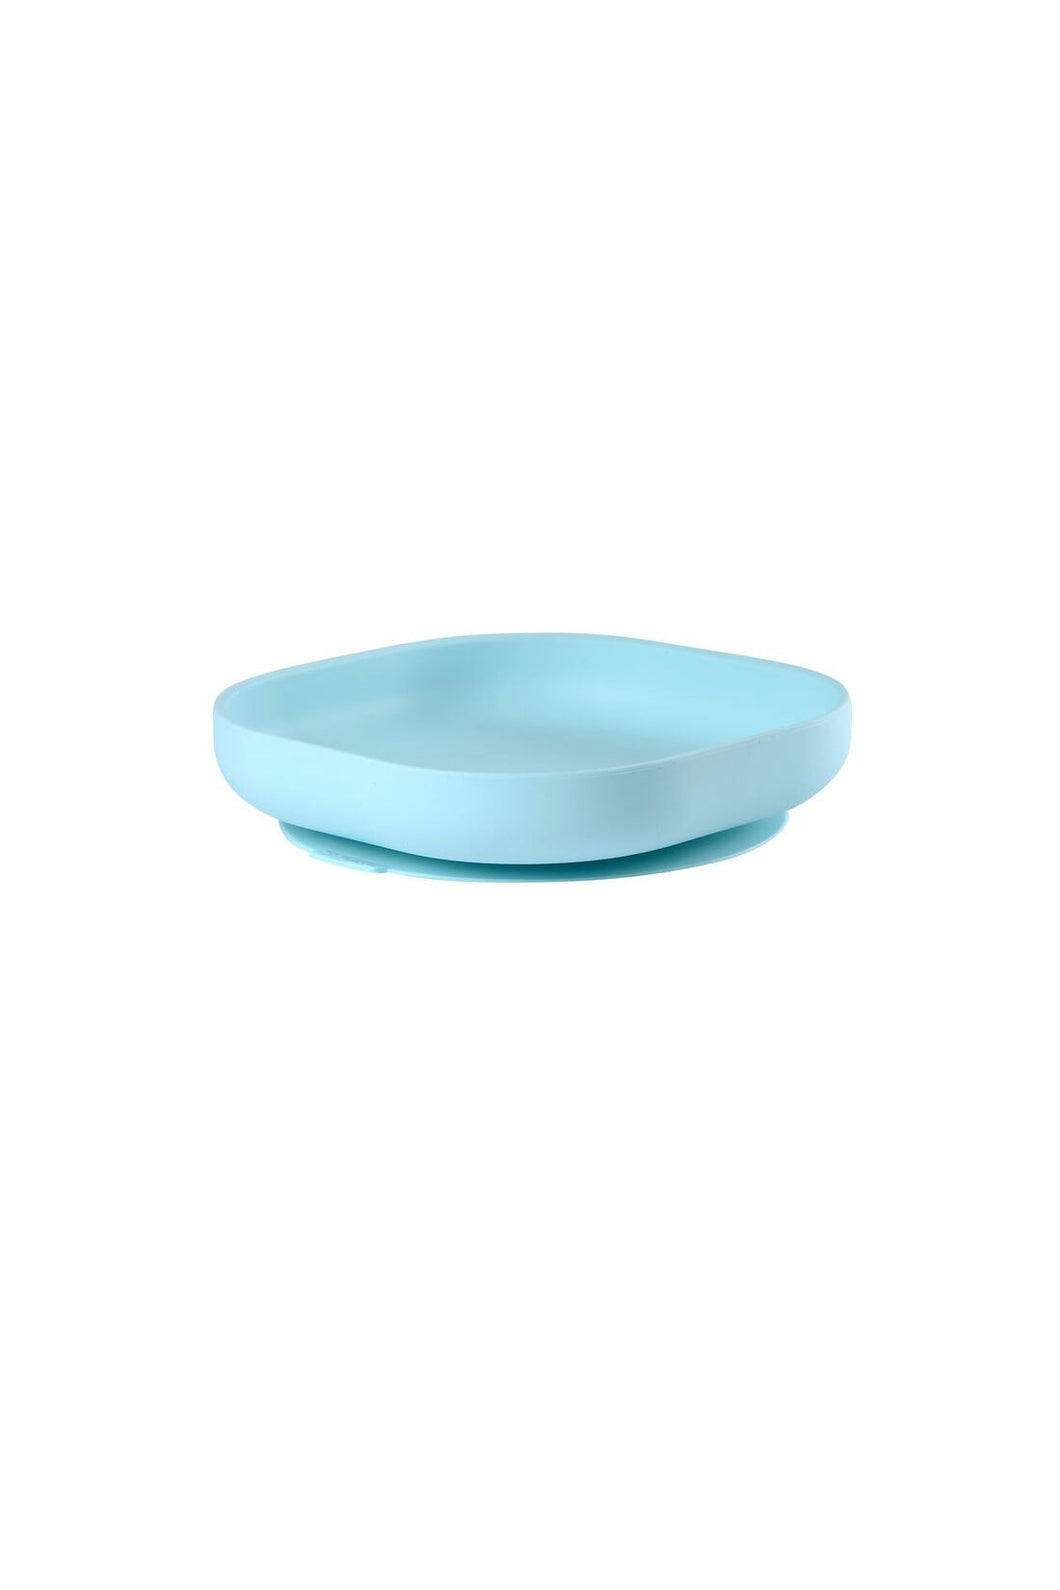 Beaba Silicone Suction Plate 1